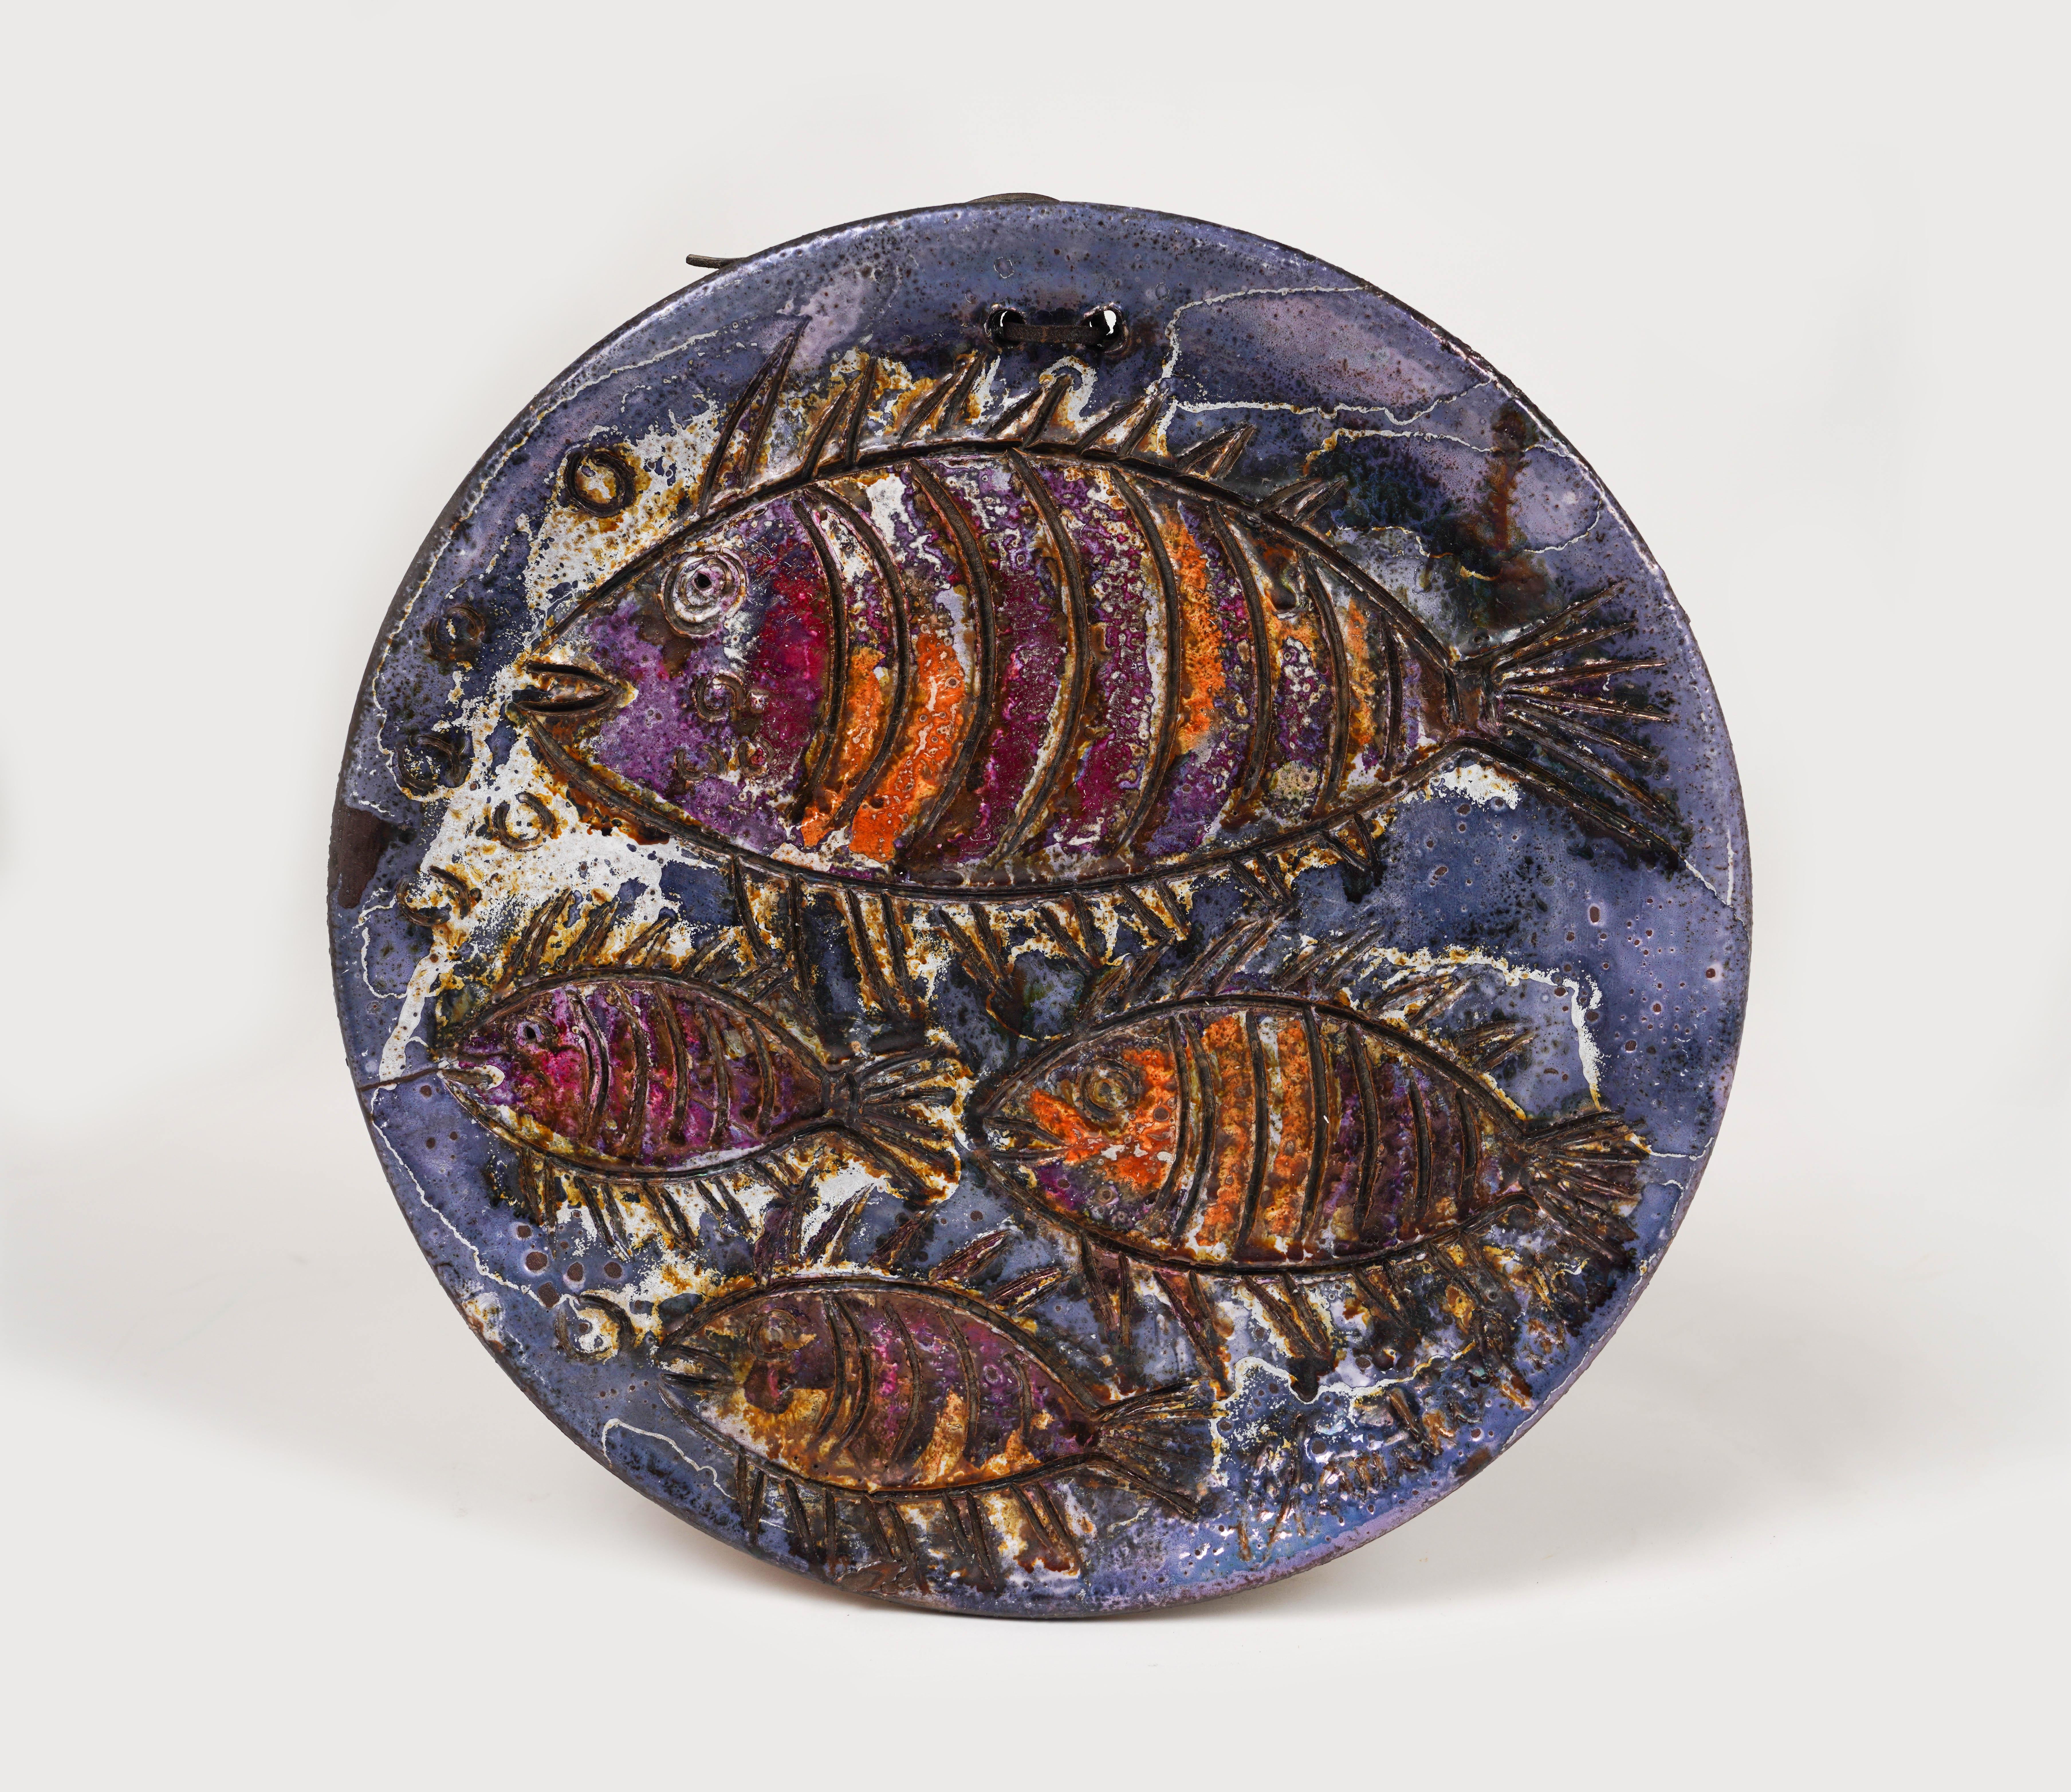 This splendid round wall plate whit decorations fish was made by the Sardinian master ceramist Claudio Pulli.

Made in Italy in the 1970s.

Claudio Pulli's works have a particular ceramic casting process and are unique in the world.

